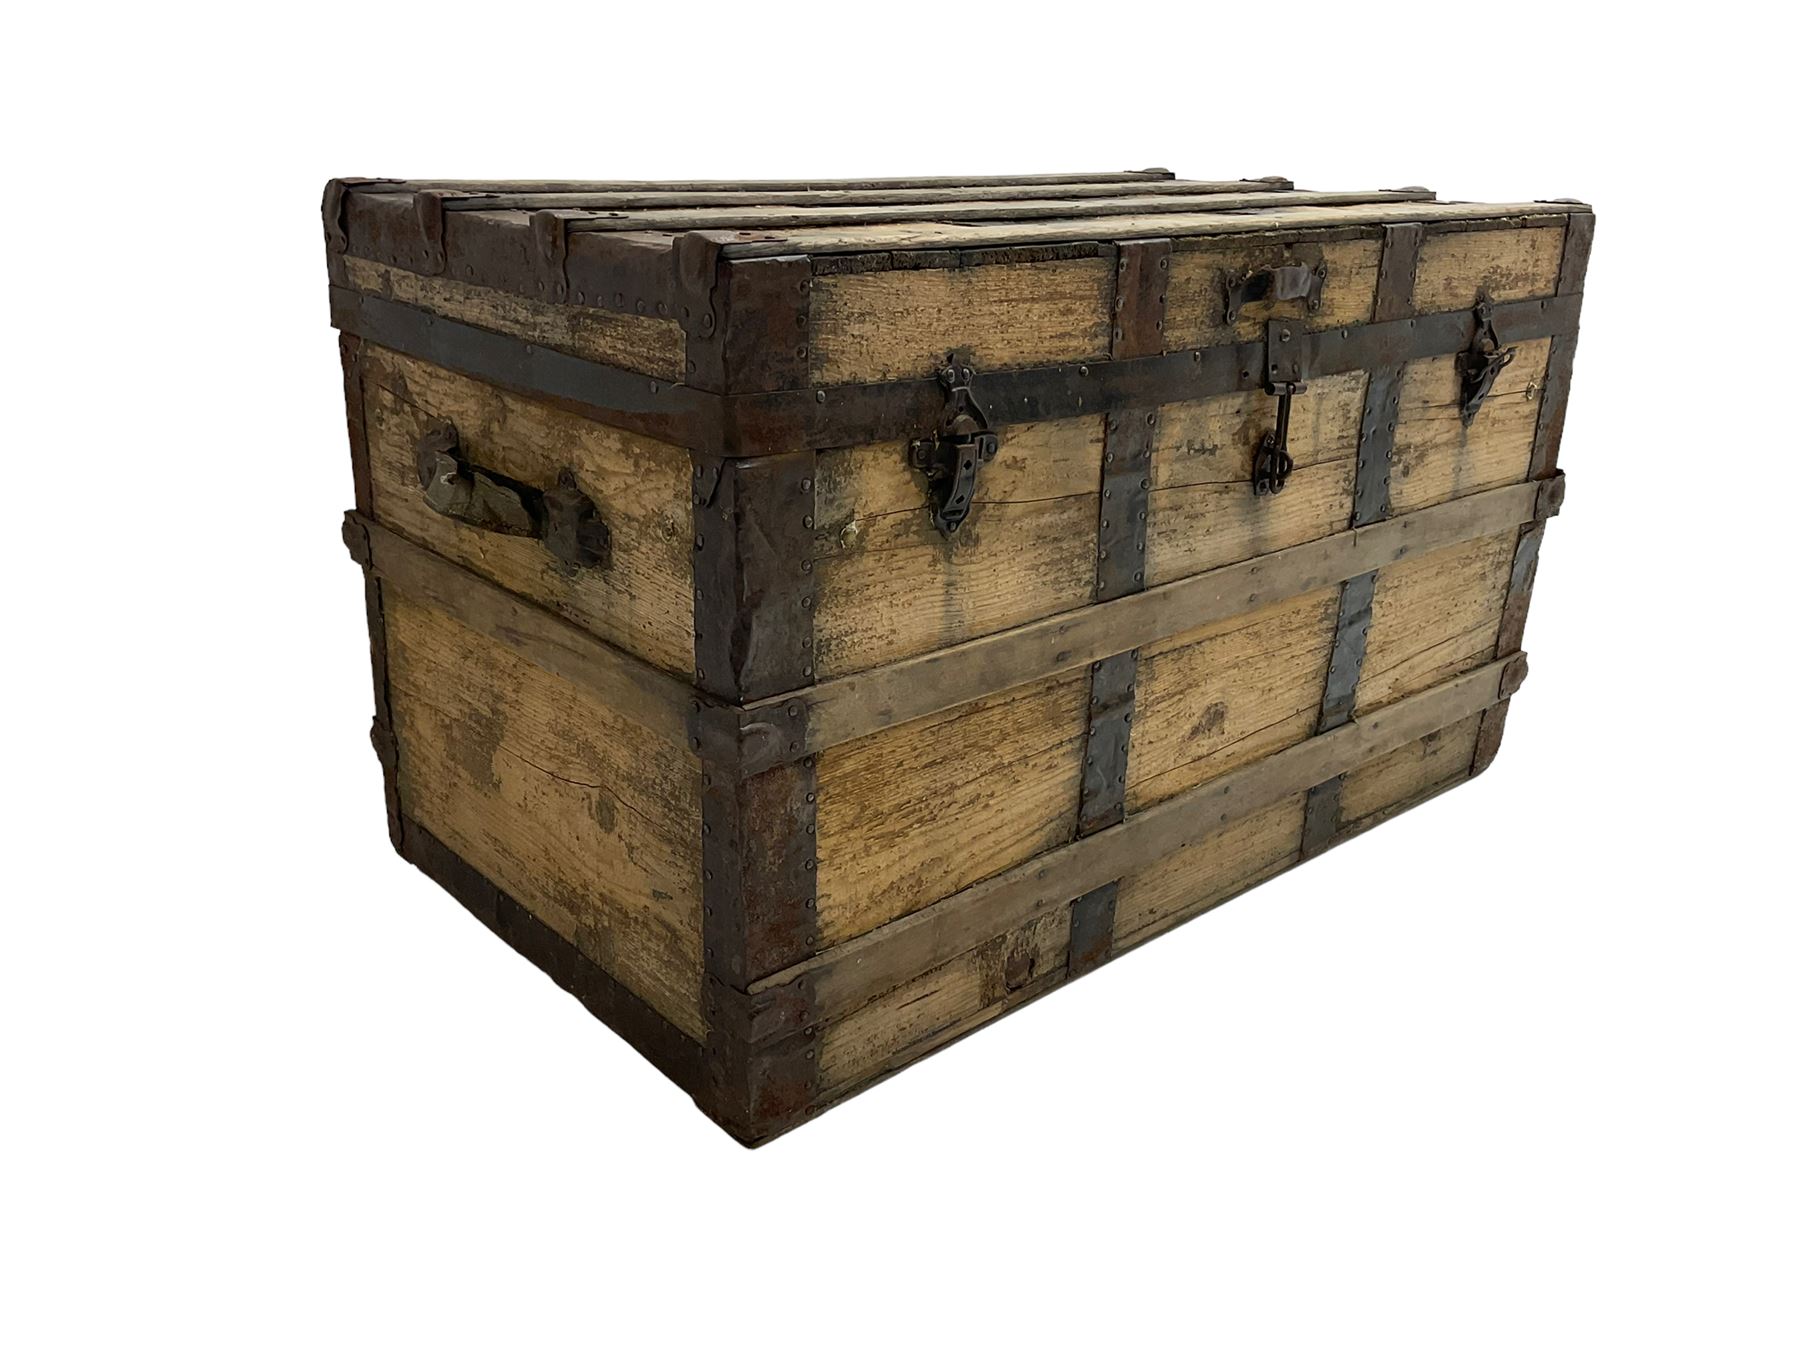 Early 20th century wooden and metal bound trunk - Image 2 of 7